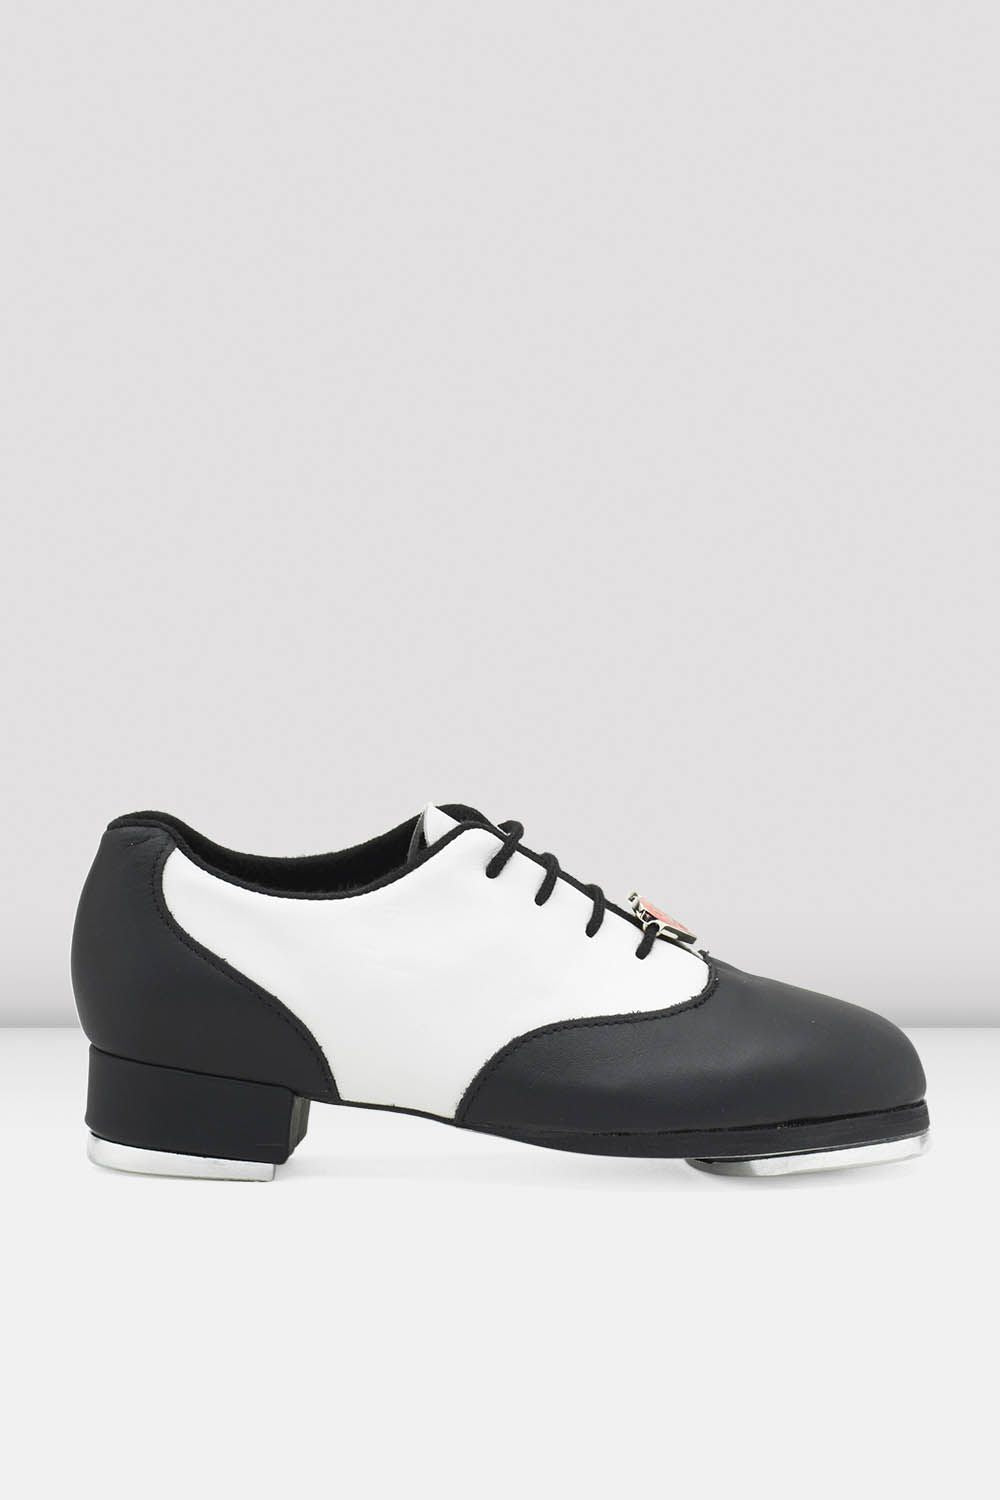 BLOCH Childrens Chloe And Maud Tap Shoes, Black White Leather